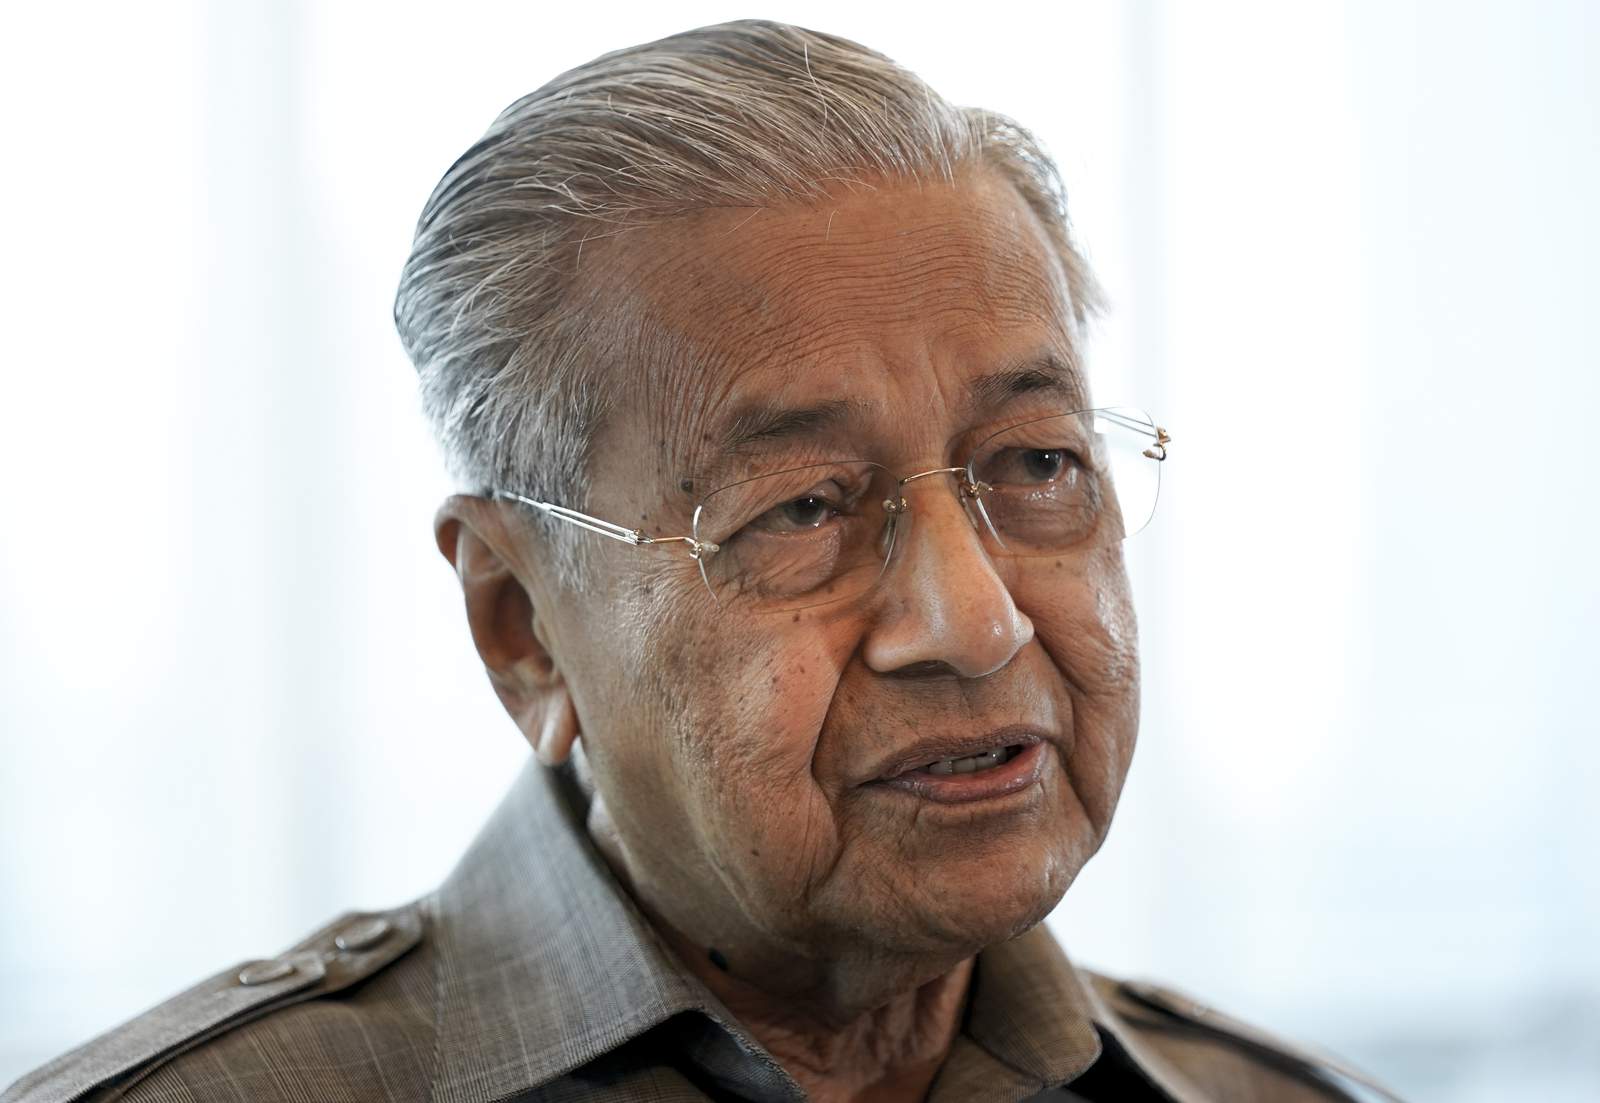 Mahathir says remarks on French attacks taken out of context